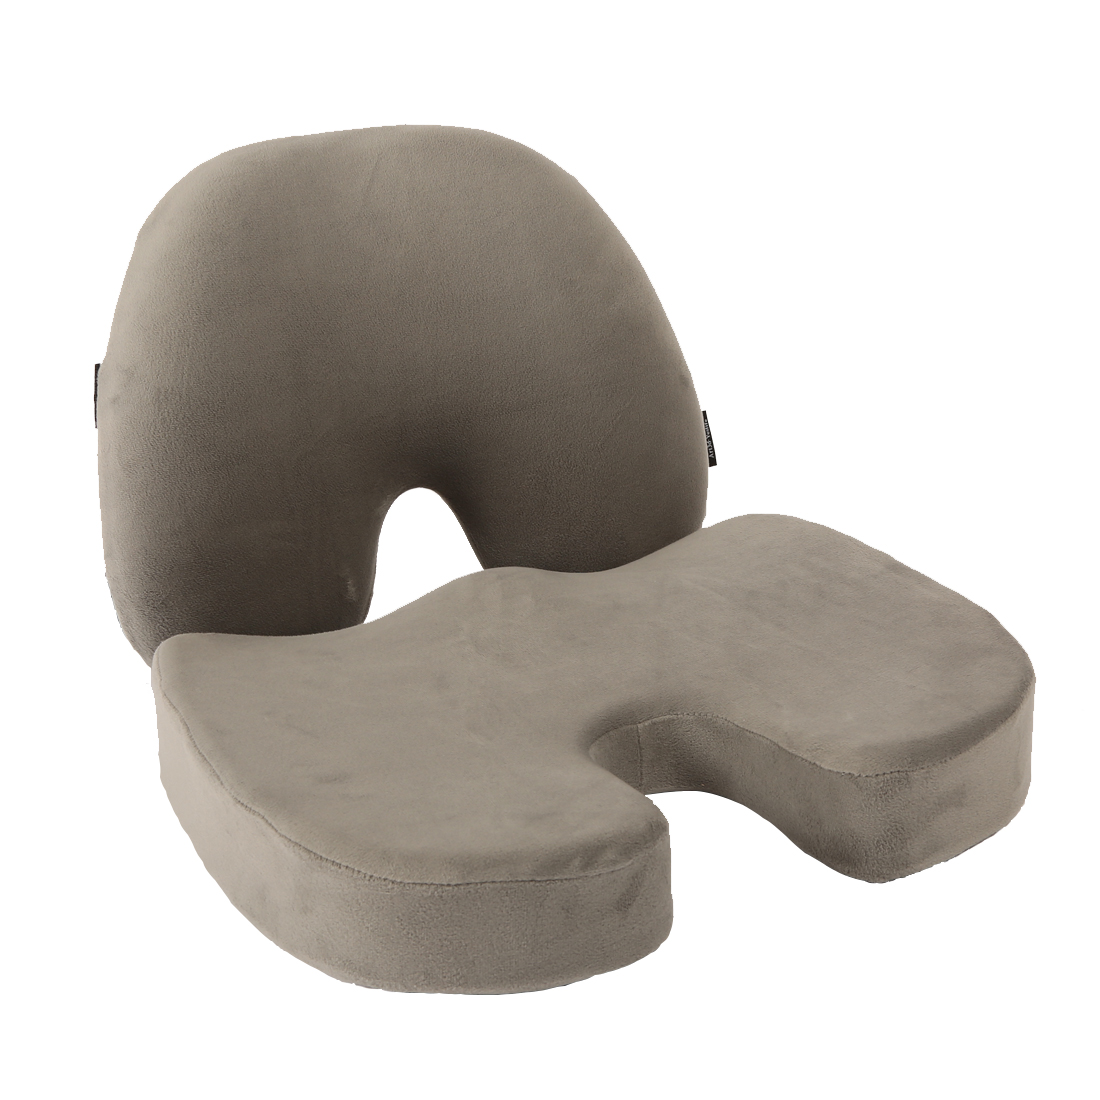 Premium Memory Foam Lumbar Support Pillow and Seat Cushion Coccyx Orthopedic, Set of 2, Gray